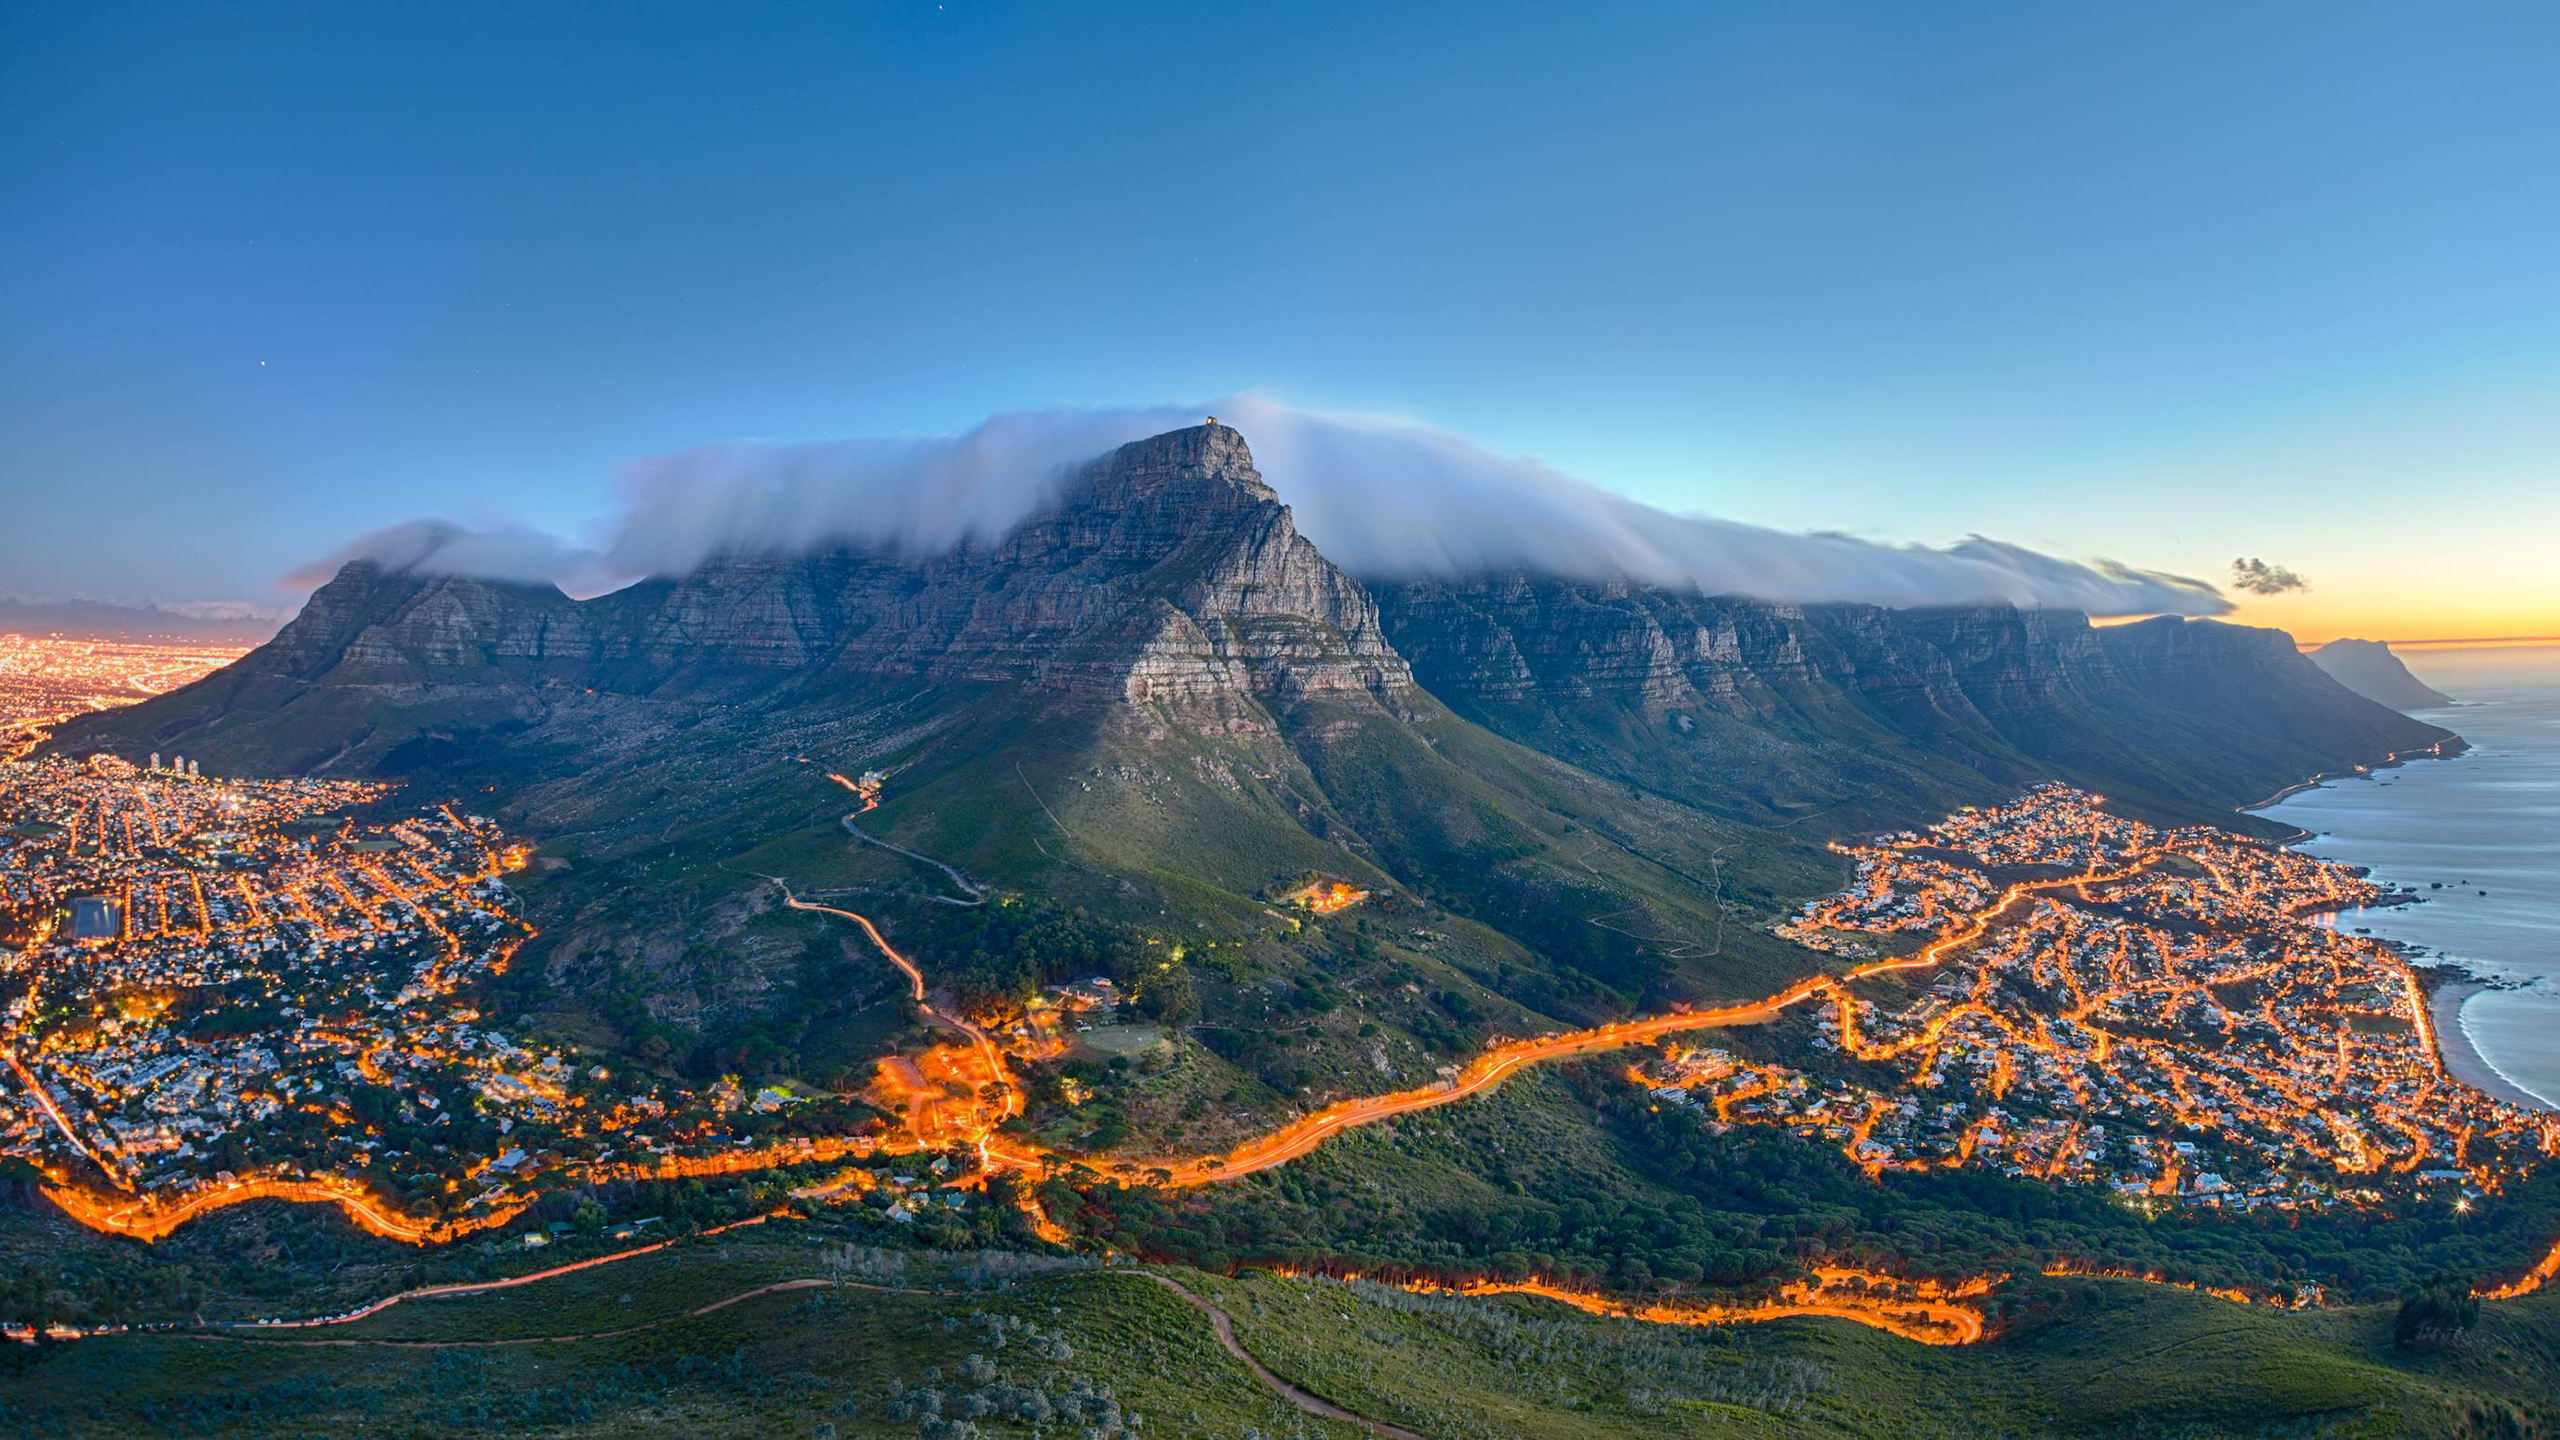 Man Made Cape Town HD Wallpaper | Background Image